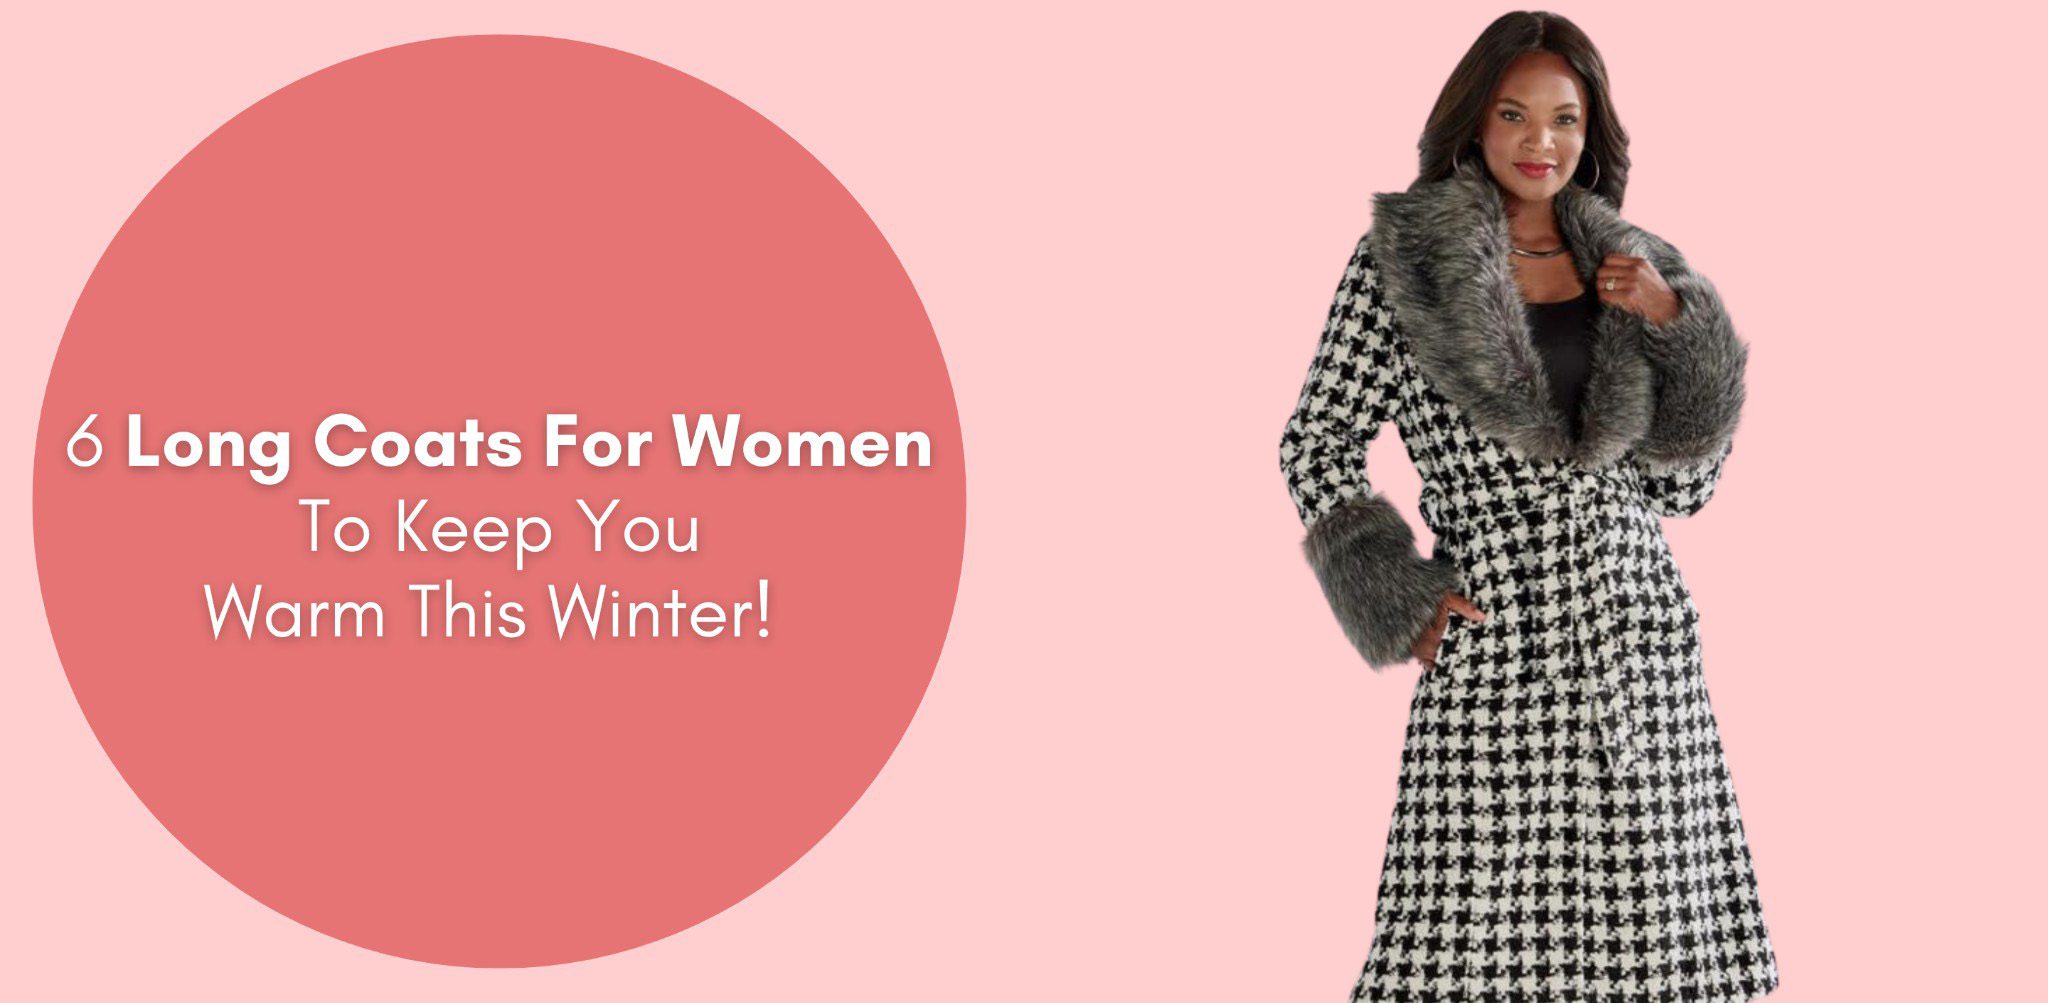 6 Long Coats For Women To Keep You Warm This Winter!